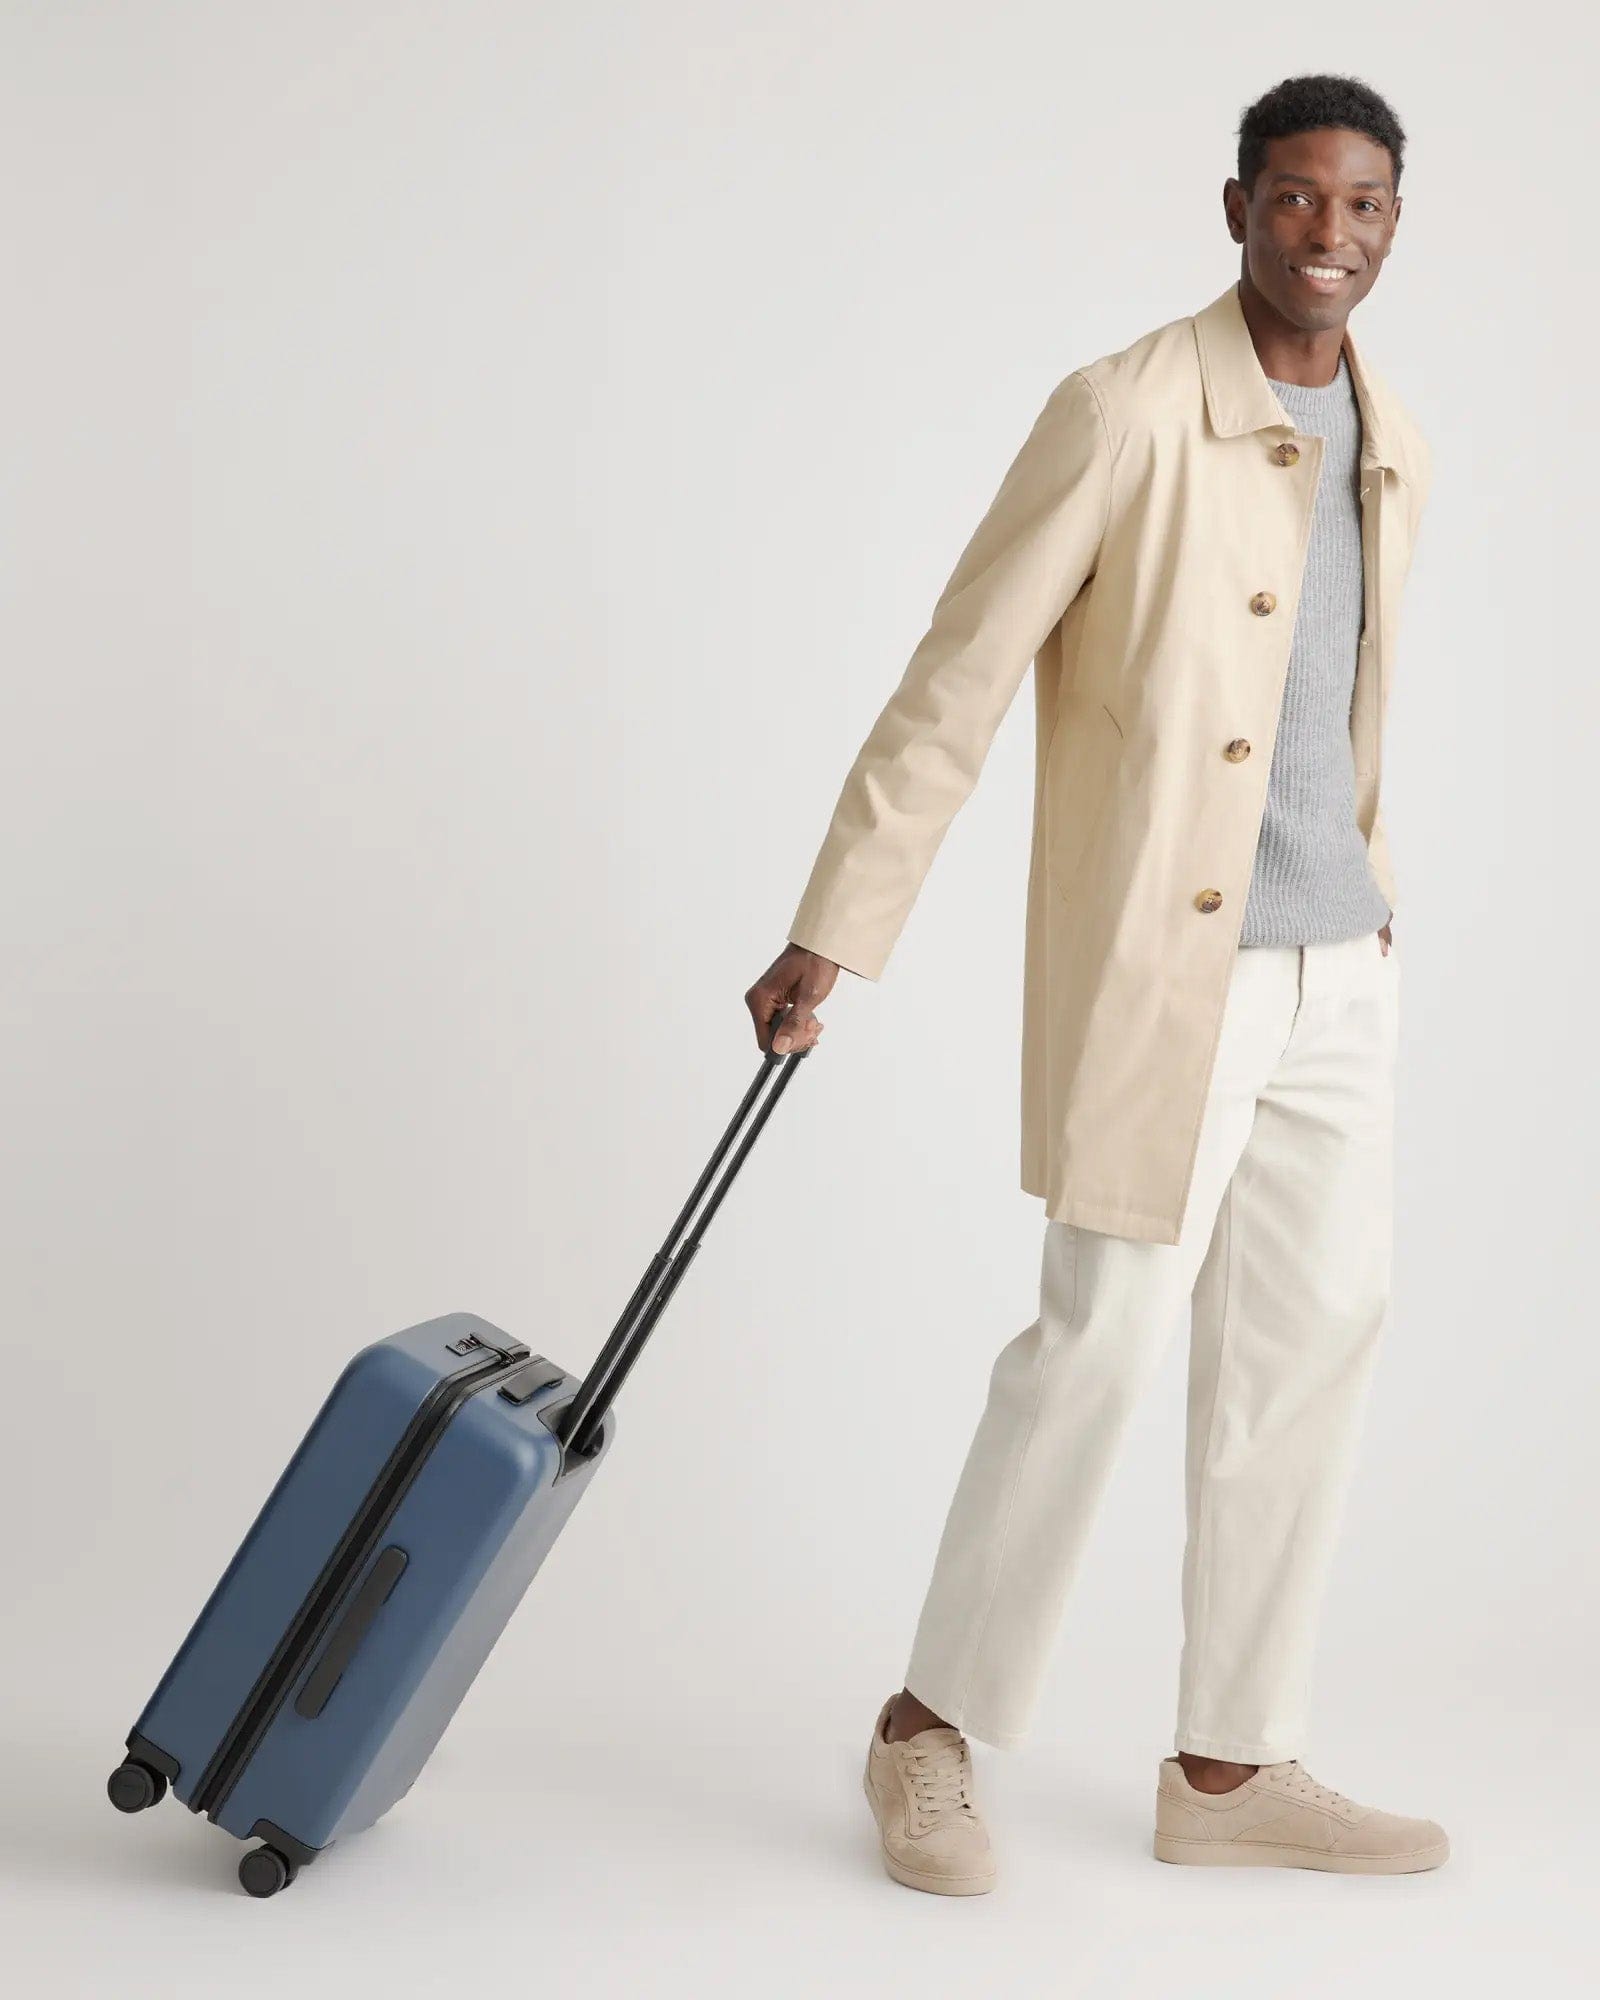 Custom Carry-on Hard Shell Suitcase | Corporate Gifts | Clove & Twine